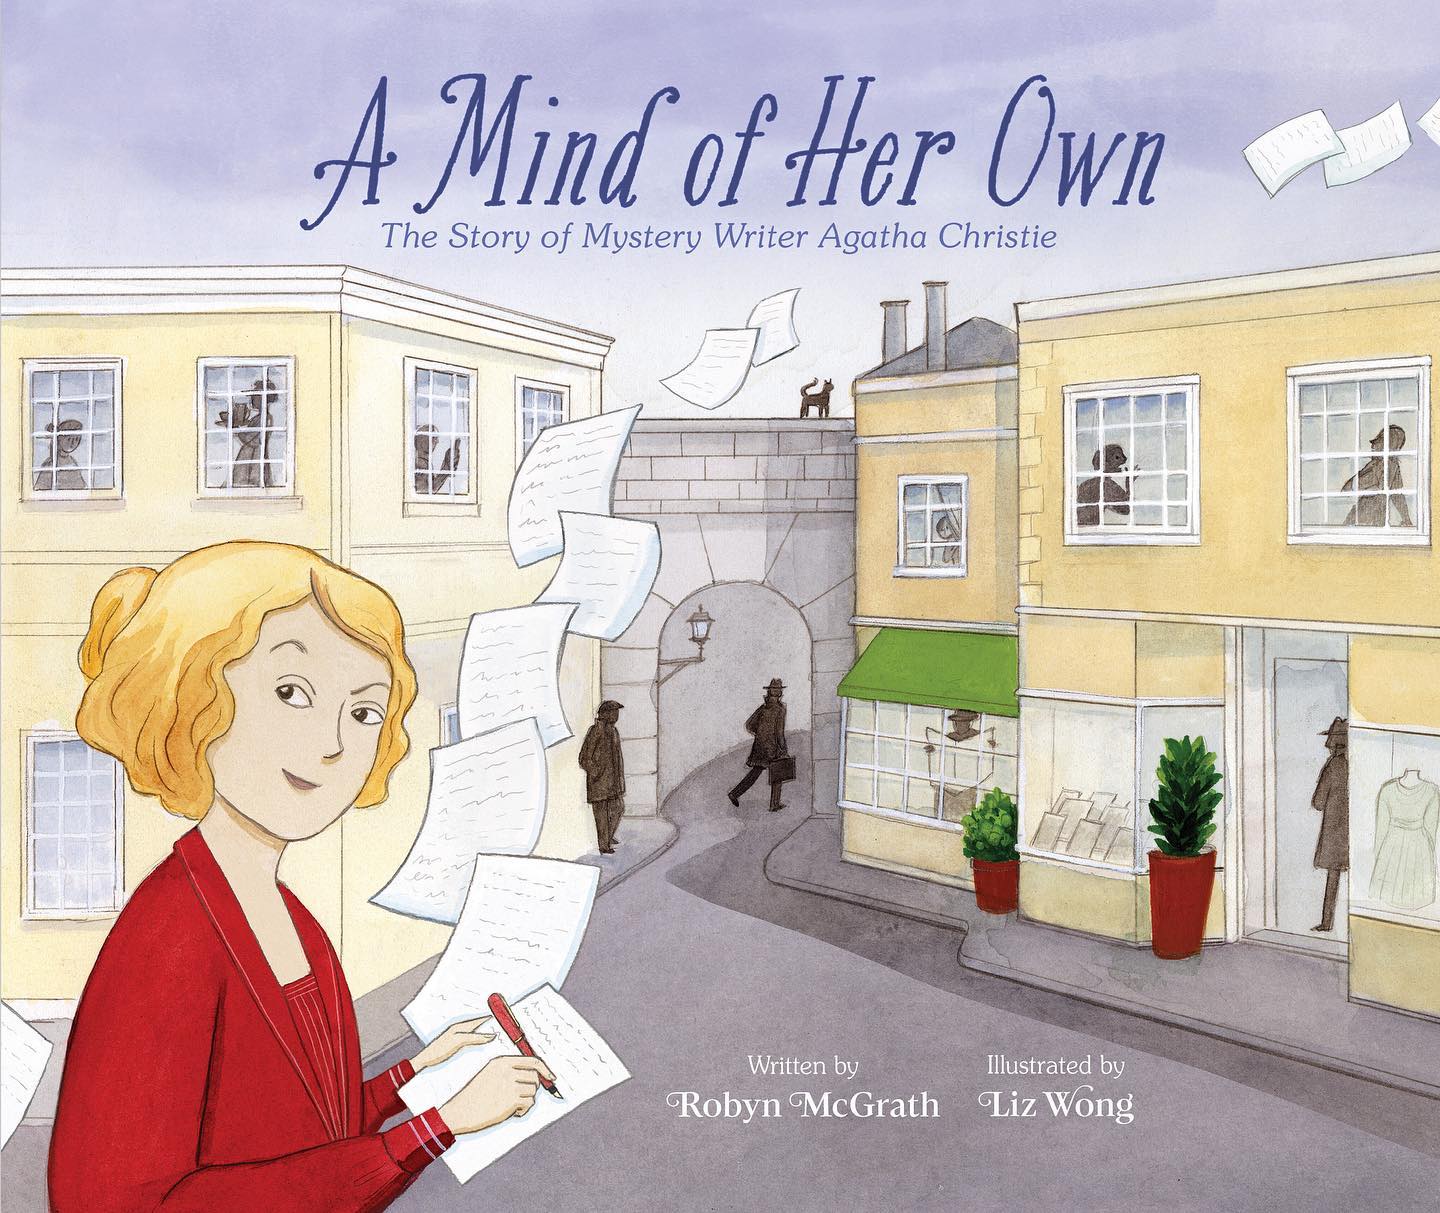 A Mind of Her Own: The Story of Mystery Writer Agatha Christie by Robyn McGrath and Liz Wong